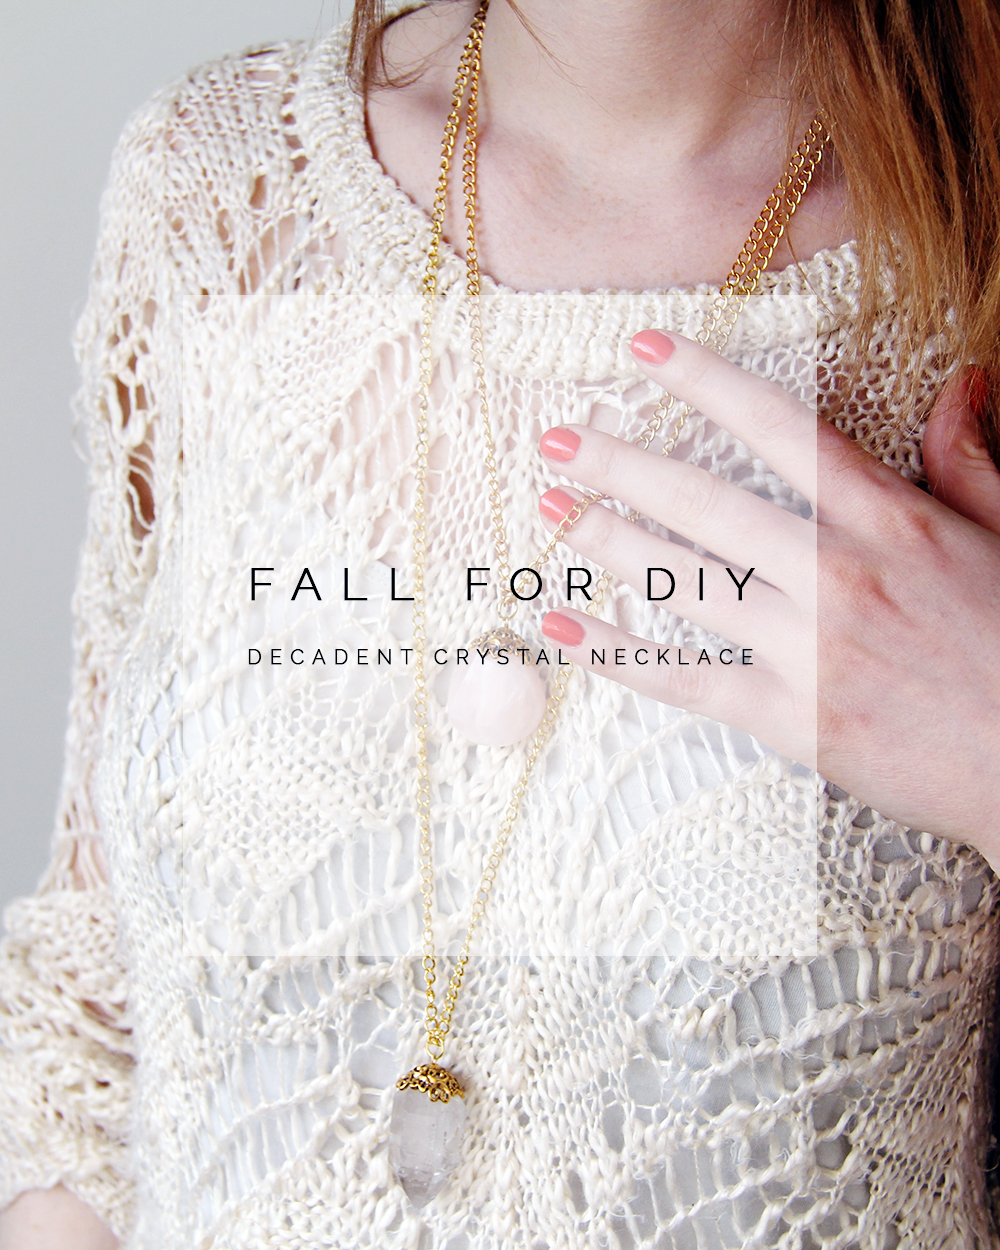 Fall For DIY Decadent Crystal Necklaces